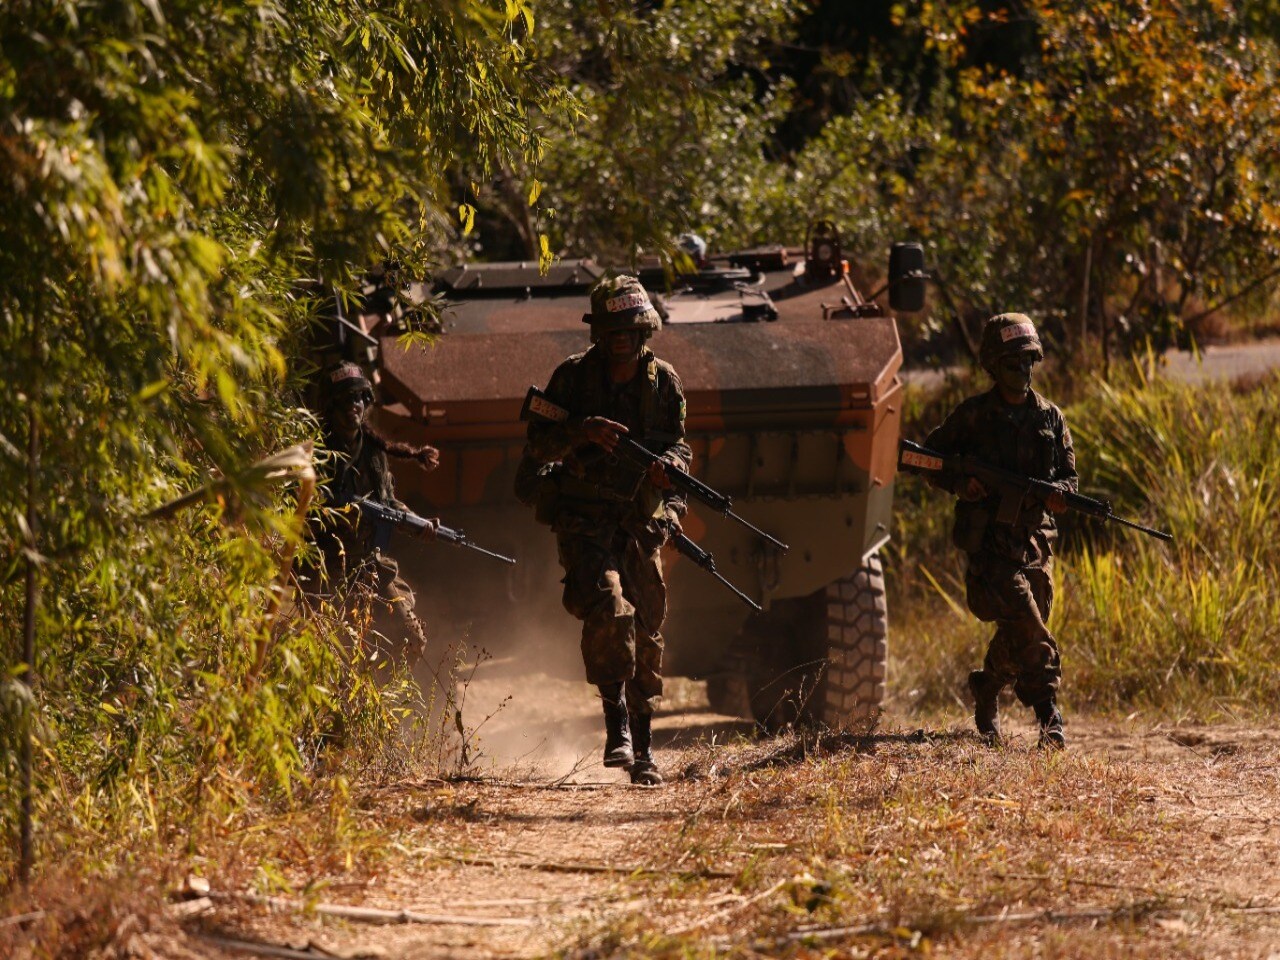 Brazilian army sergeants' training course concludes field exercise